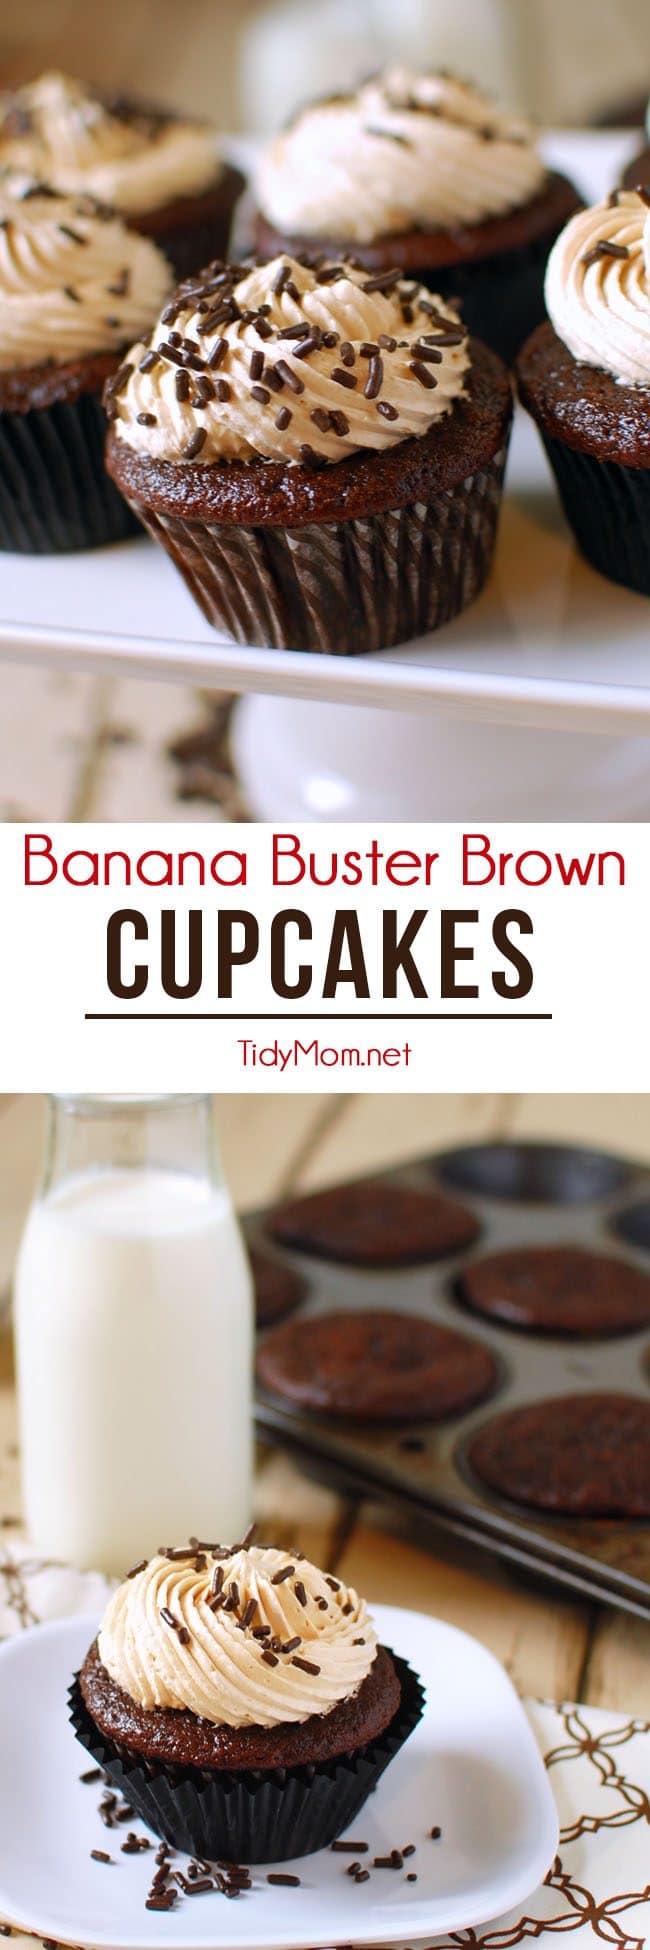 Banana Chocolate Cupcakes with Peanut Butter Frosting = Banana Buster Brown Cupcakes recipe at TidyMom.net